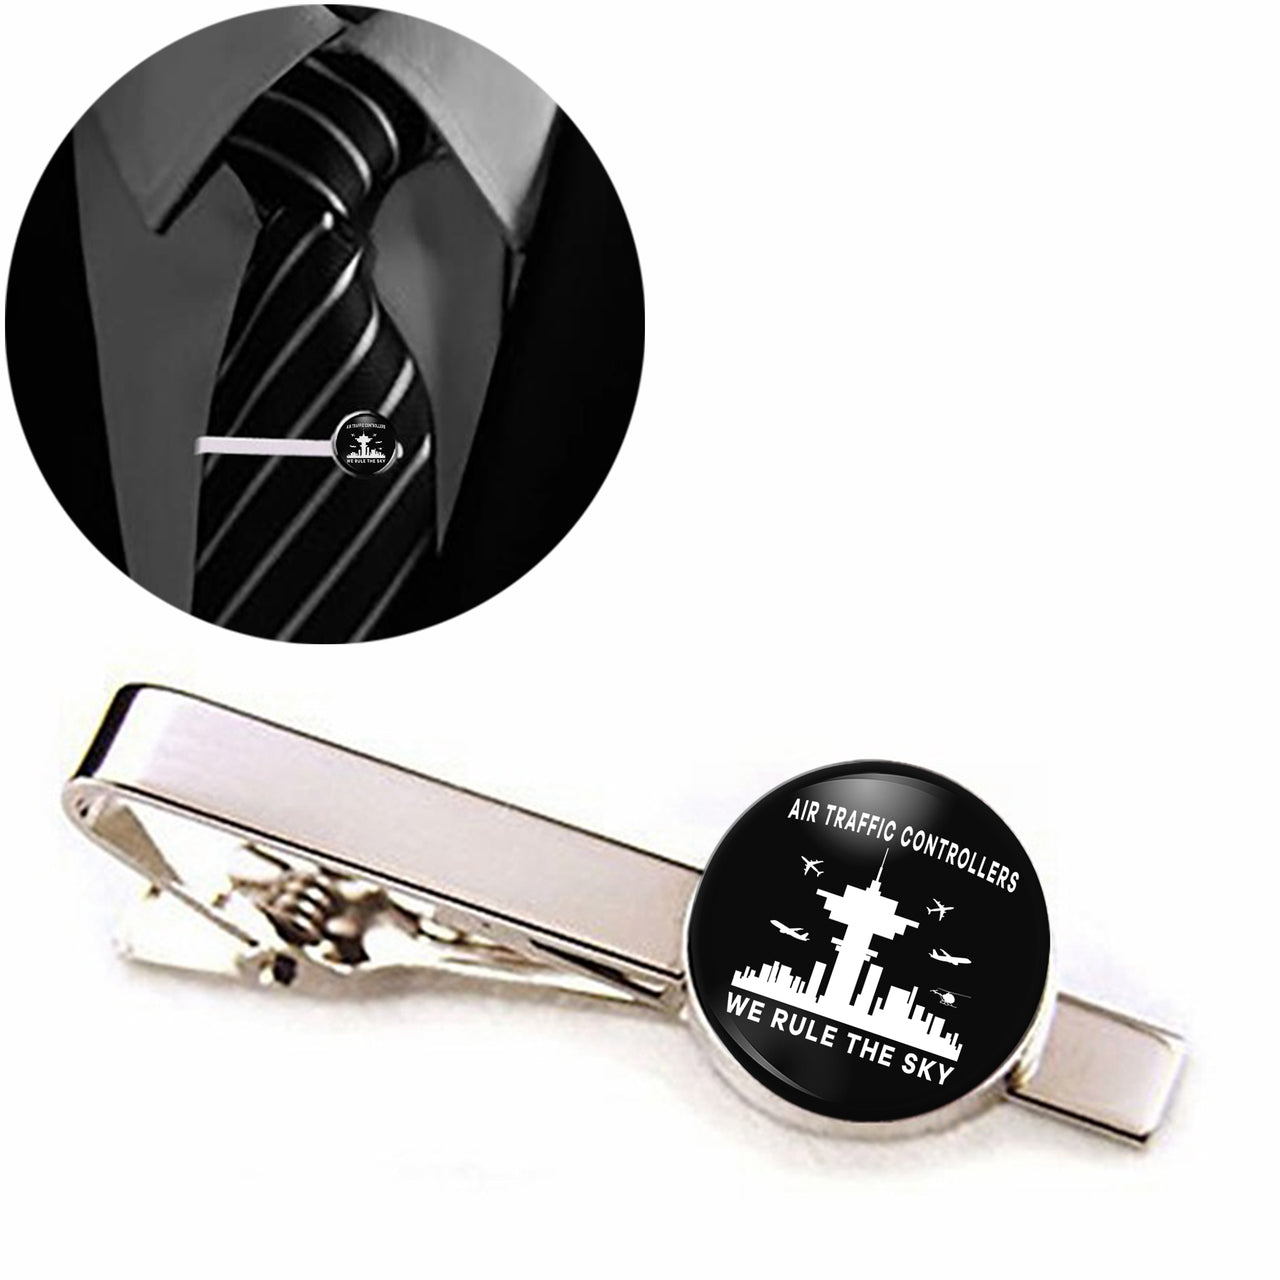 Air Traffic Controllers - We Rule The Sky Designed Tie Clips